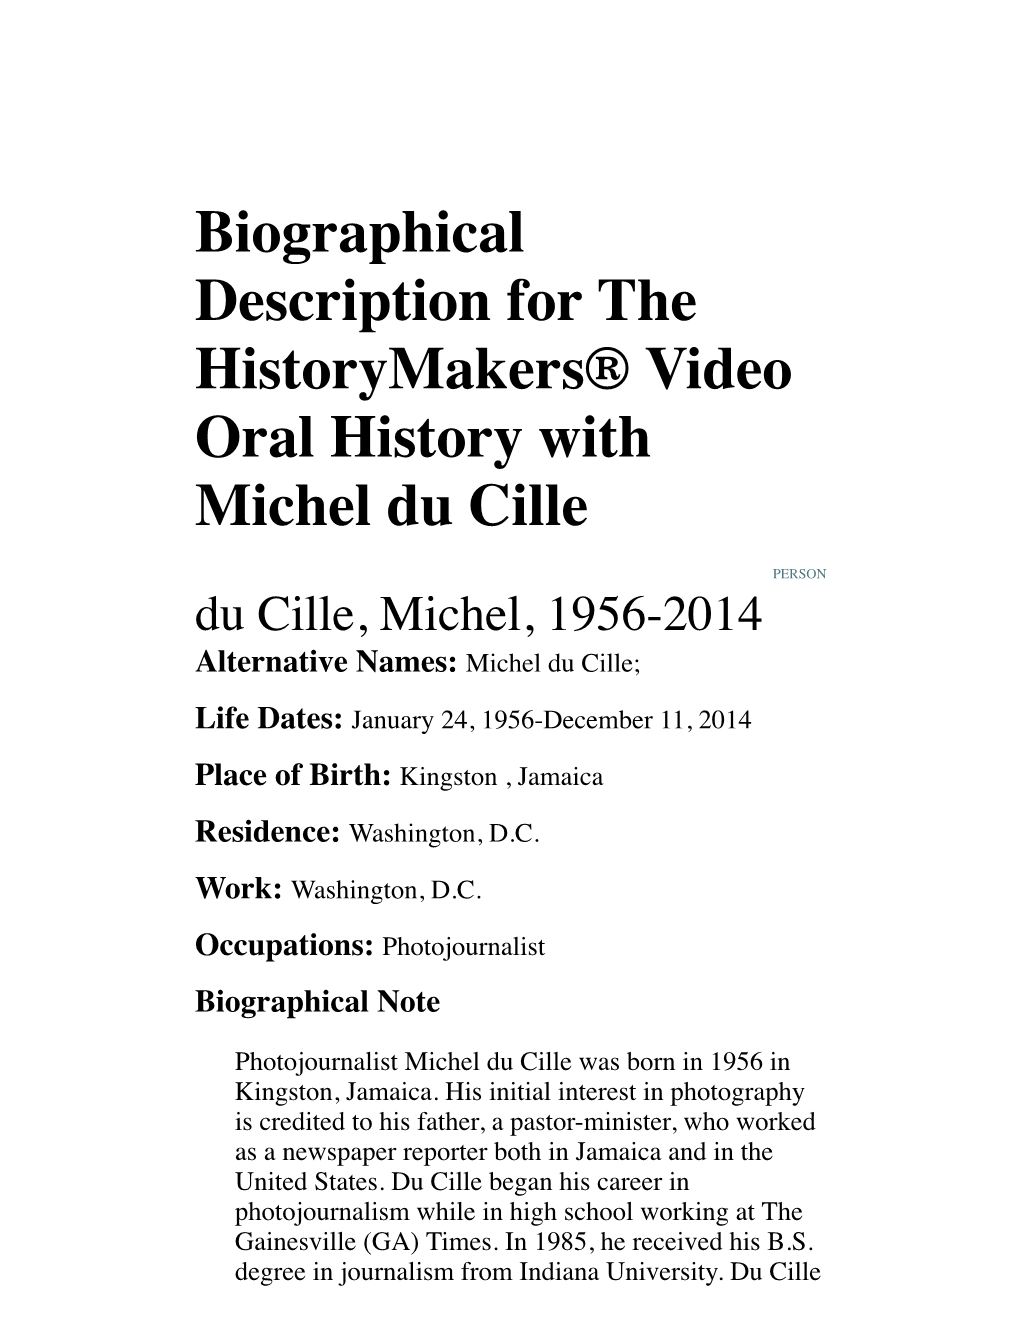 Biographical Description for the Historymakers® Video Oral History with Michel Du Cille